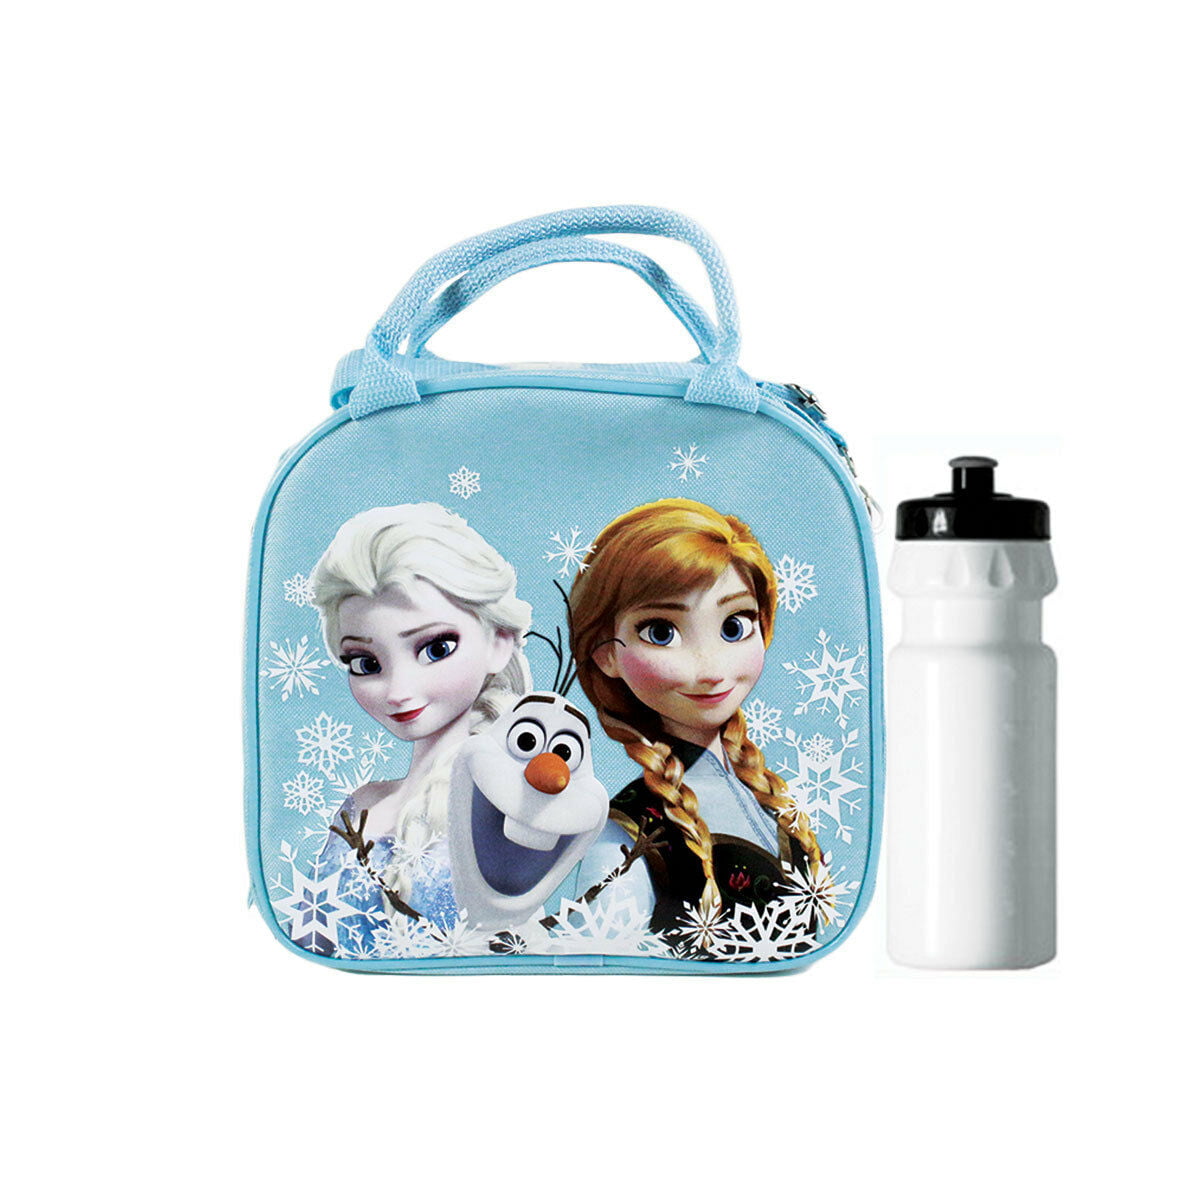 picnics DISNEY FROZEN OLAF CHARACTER LUNCH BAG IDEAL FOR SCHOOL back to school 